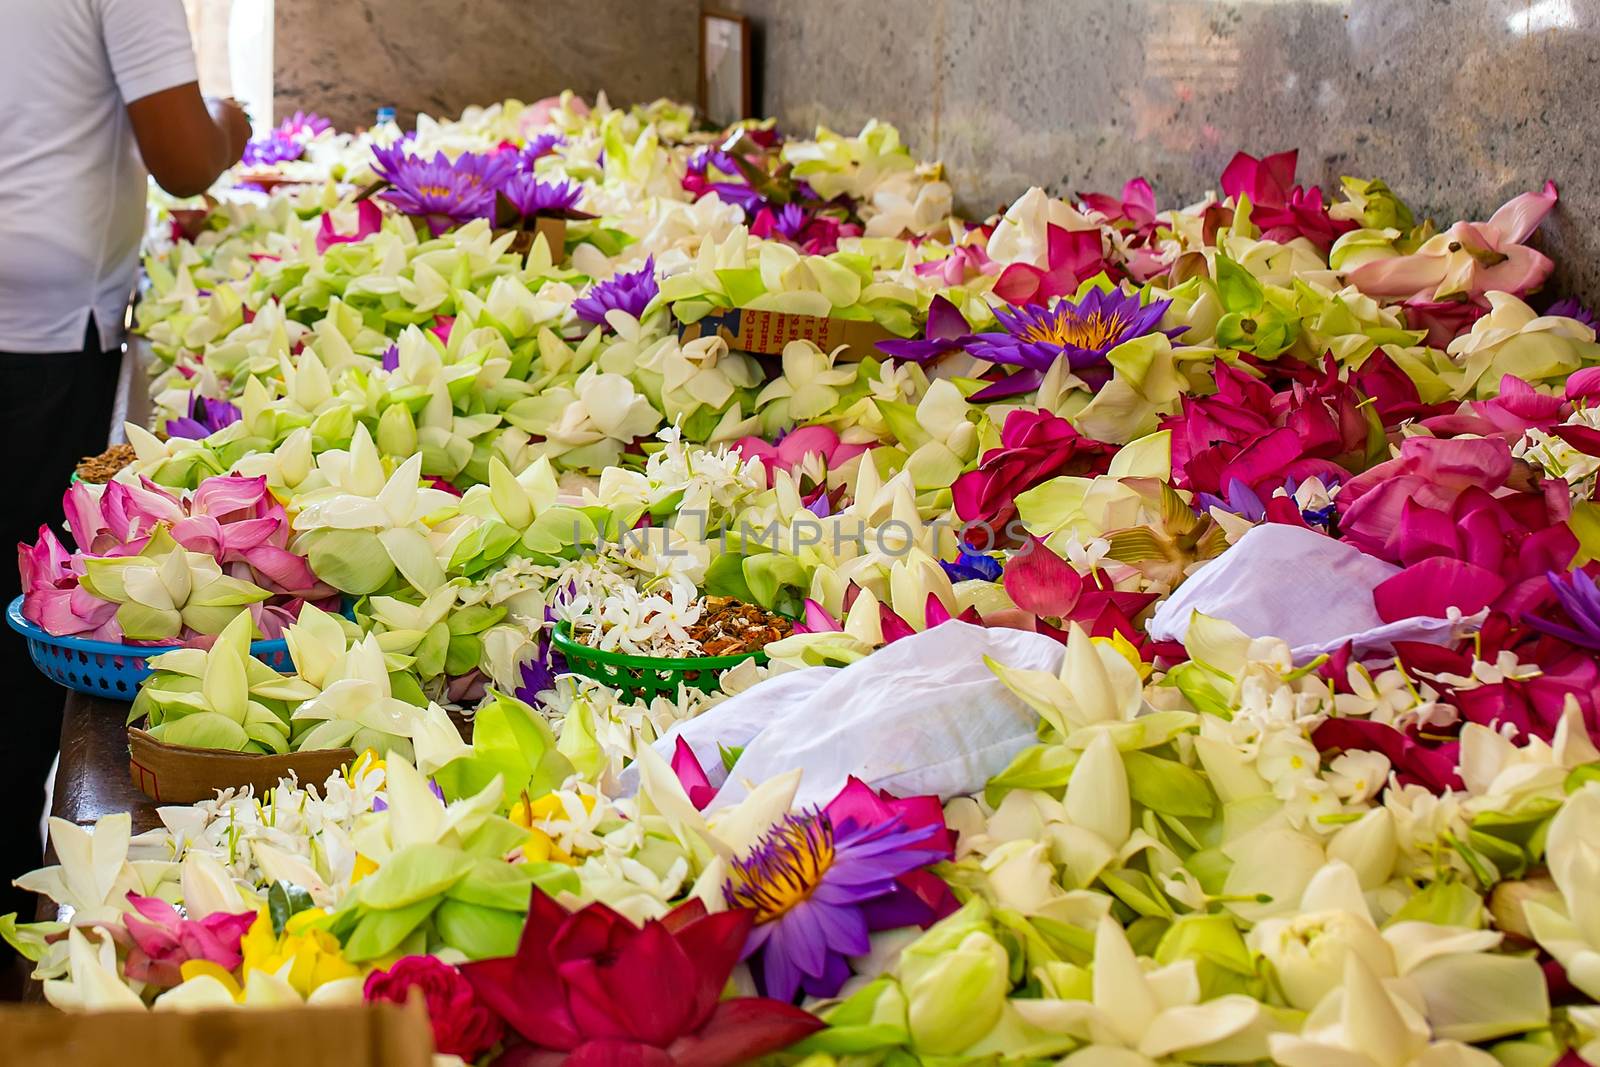 close-up flower offerings to Buddha inside the temple, Sri Lanka by 977_ReX_977